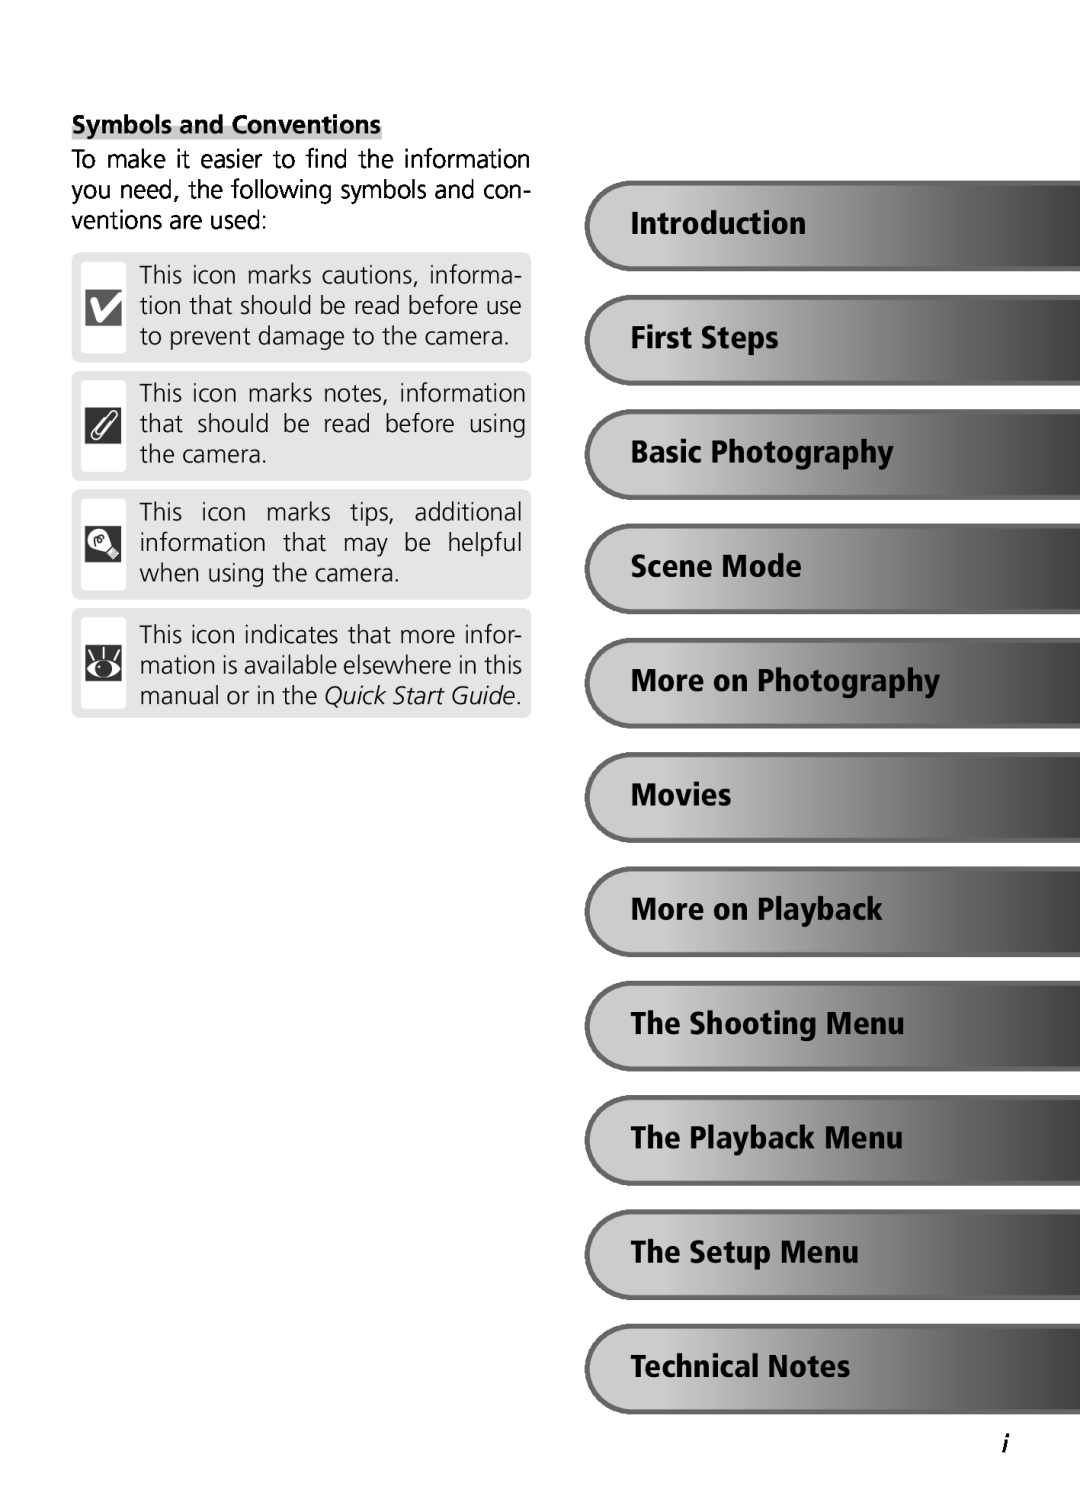 Nikon COOLPIX8800 Introduction First Steps Basic Photography Scene Mode, The Playback Menu The Setup Menu Technical Notes 